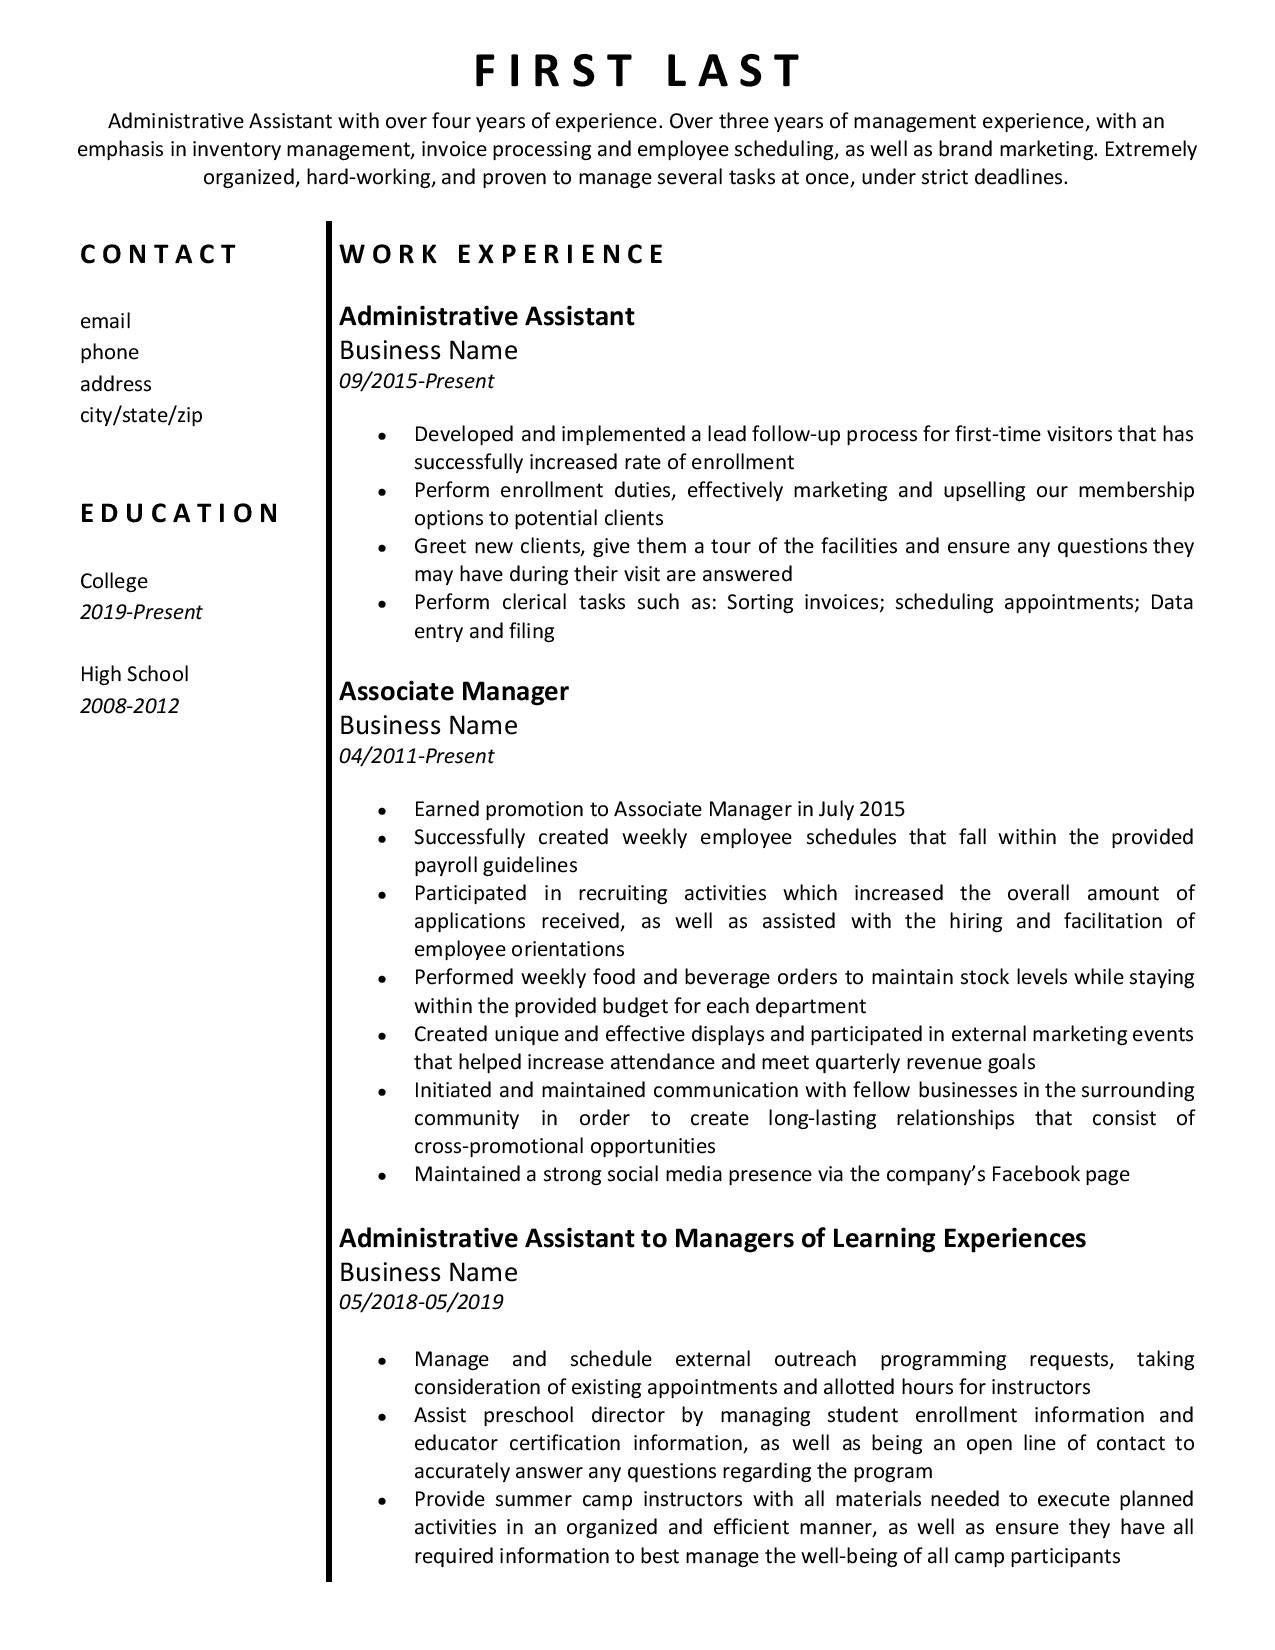 Sample Resume with One Company Multiple Positions Help! – Multiple Positions within Same Company and On/off …